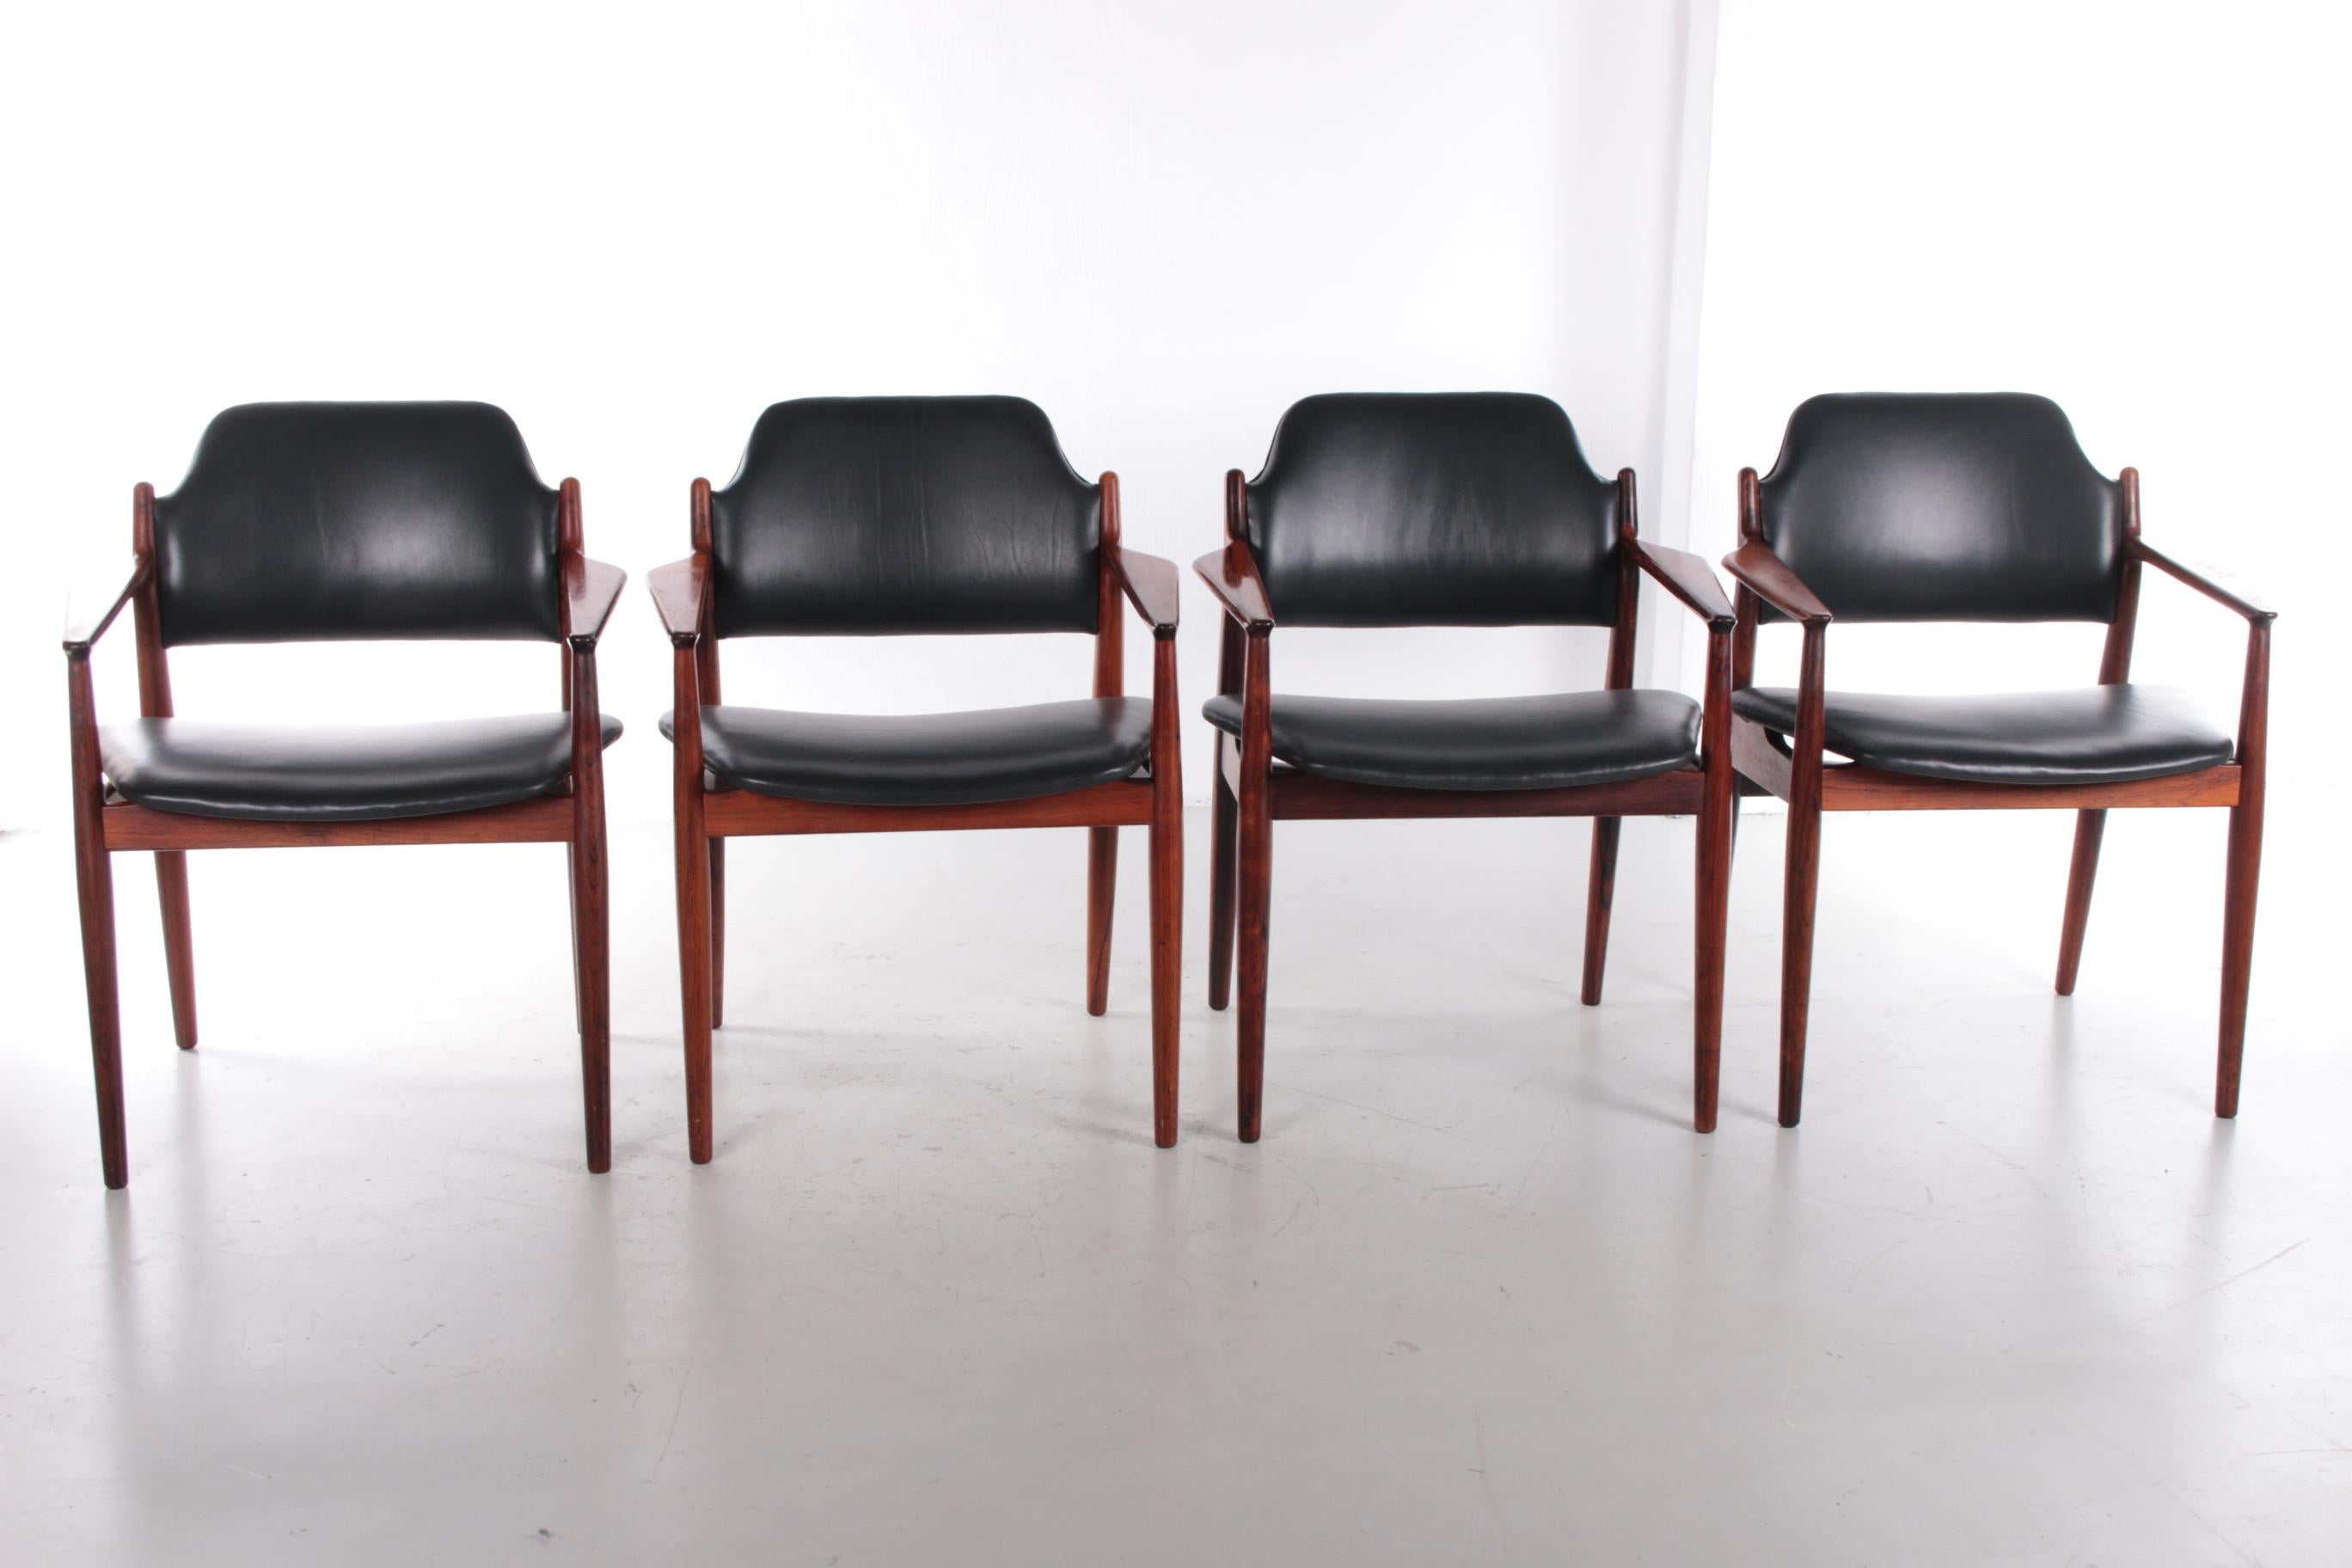 Mid-Century Modern Dining Room Set Dining Table with Chairs by Arne Vodder by Sibast, 1960s For Sale